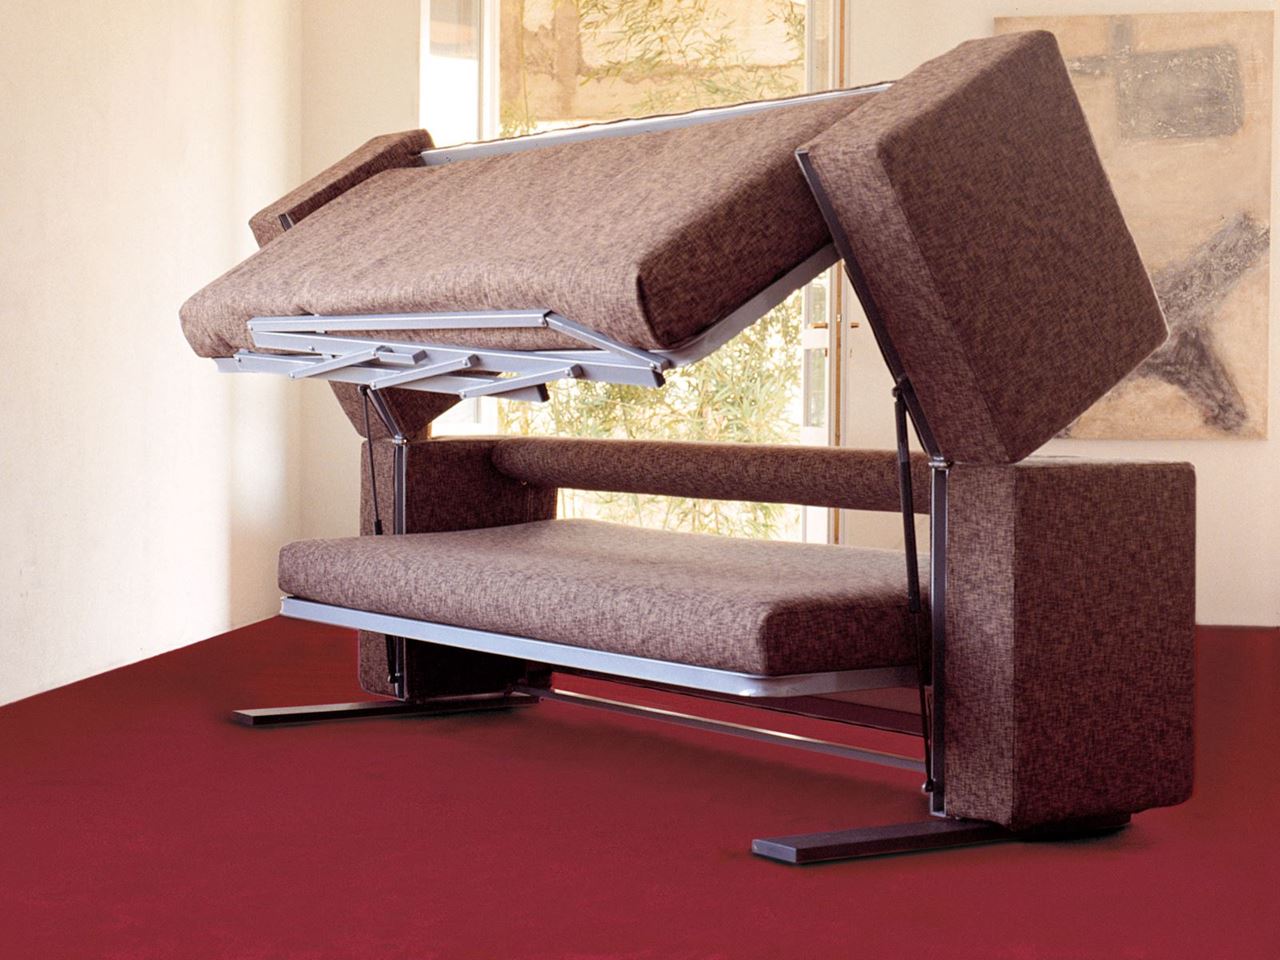 Magical Sofa transforms into a bunk bed in 10 seconds only!